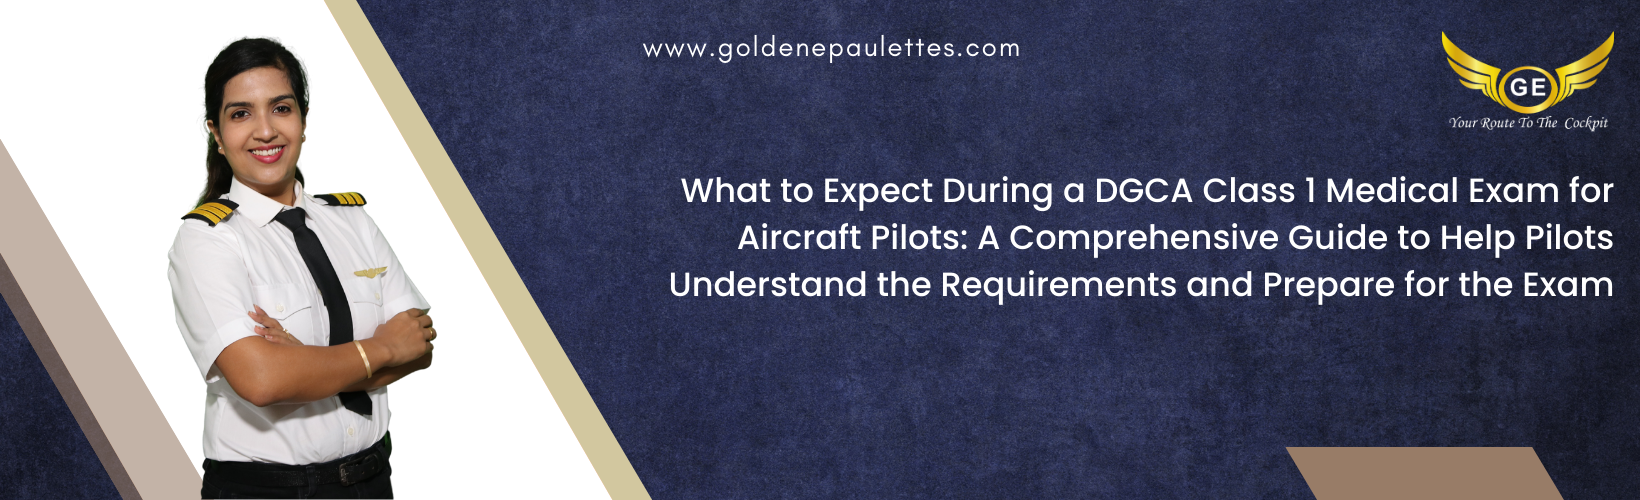 What to Expect During a DGCA Class 1 Medical Exam for Aircraft Pilots